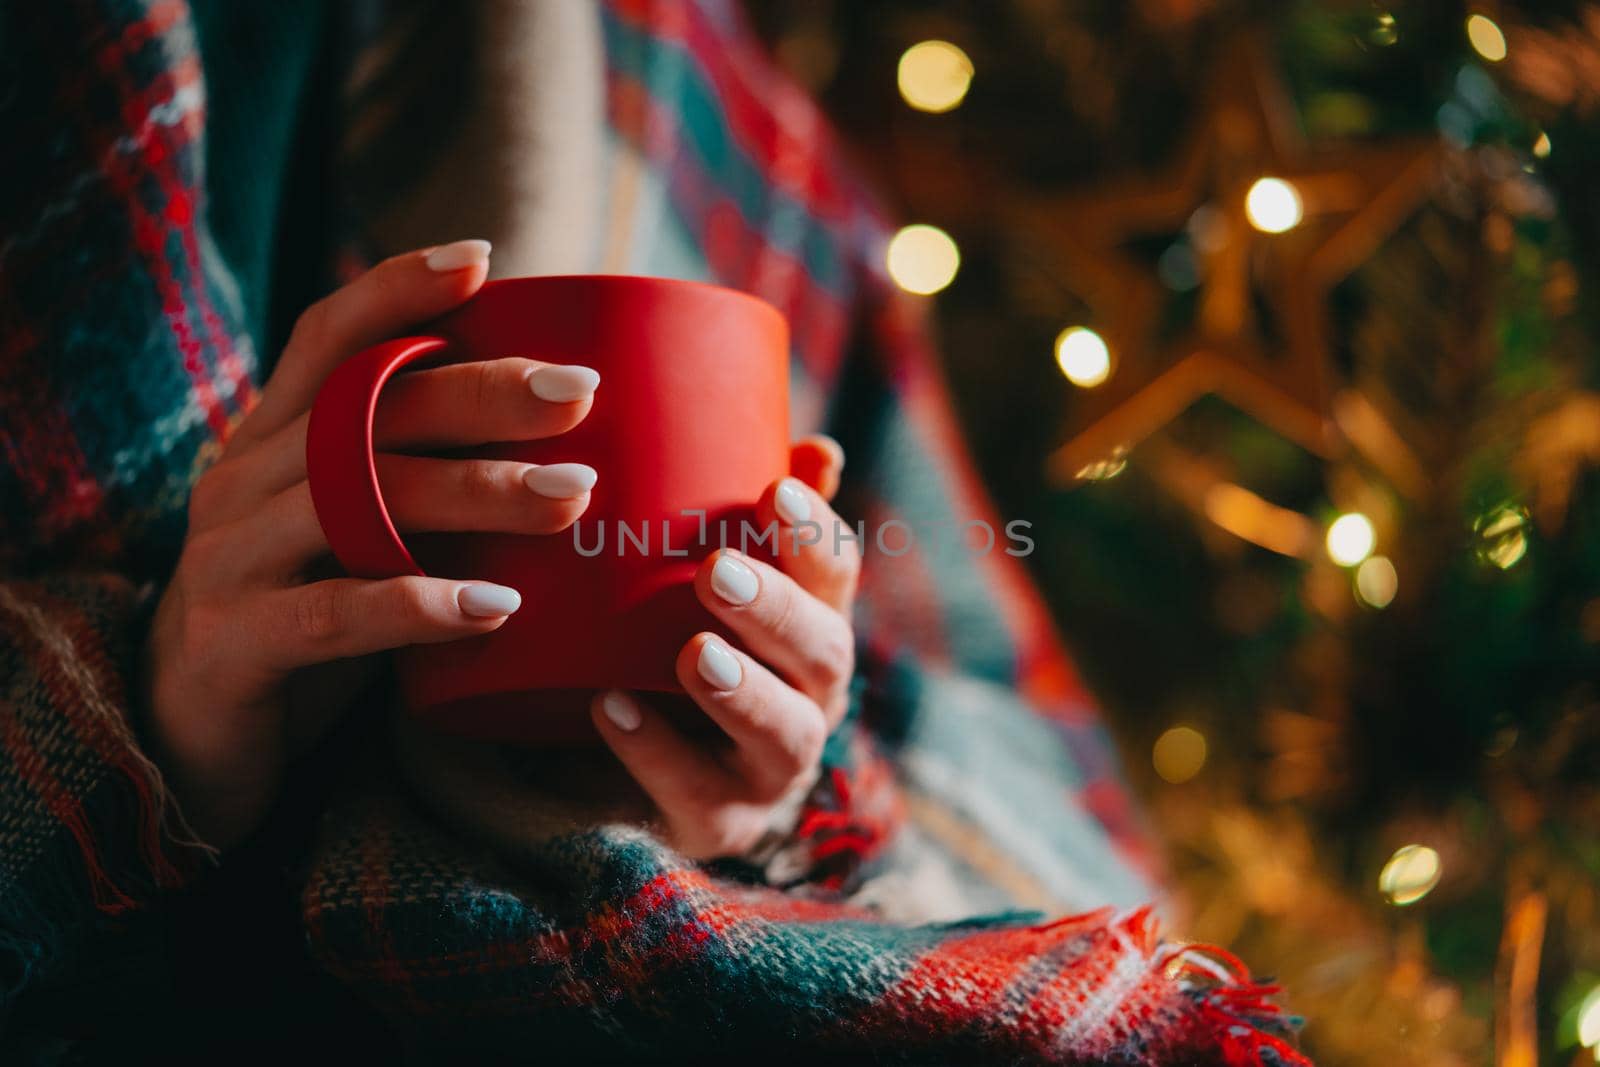 Unrecognizable woman holding cozy red mug on glowing Christmas tree background. Girl with hot drink - tea, coffee or cocoa. Concept of the New Year, comfort and warmth. High quality